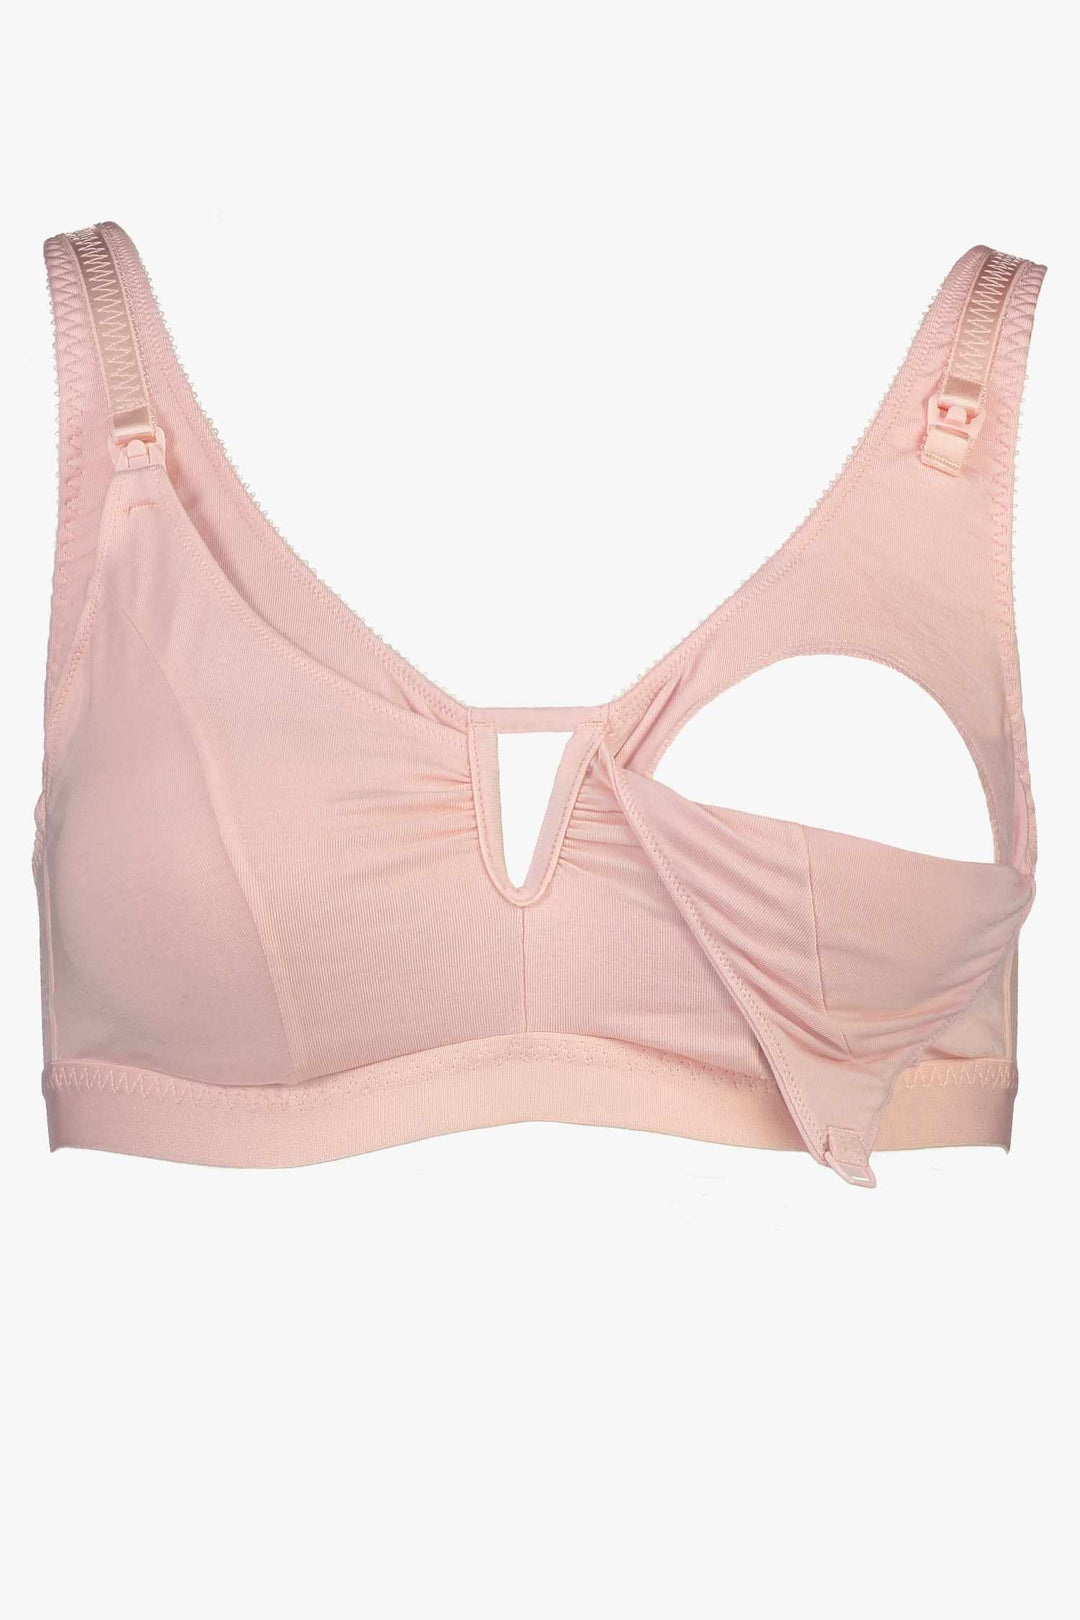 Videris Lingerie Belle nursing bra with soft elastic band, drop down cup and deep sides in rosy pink